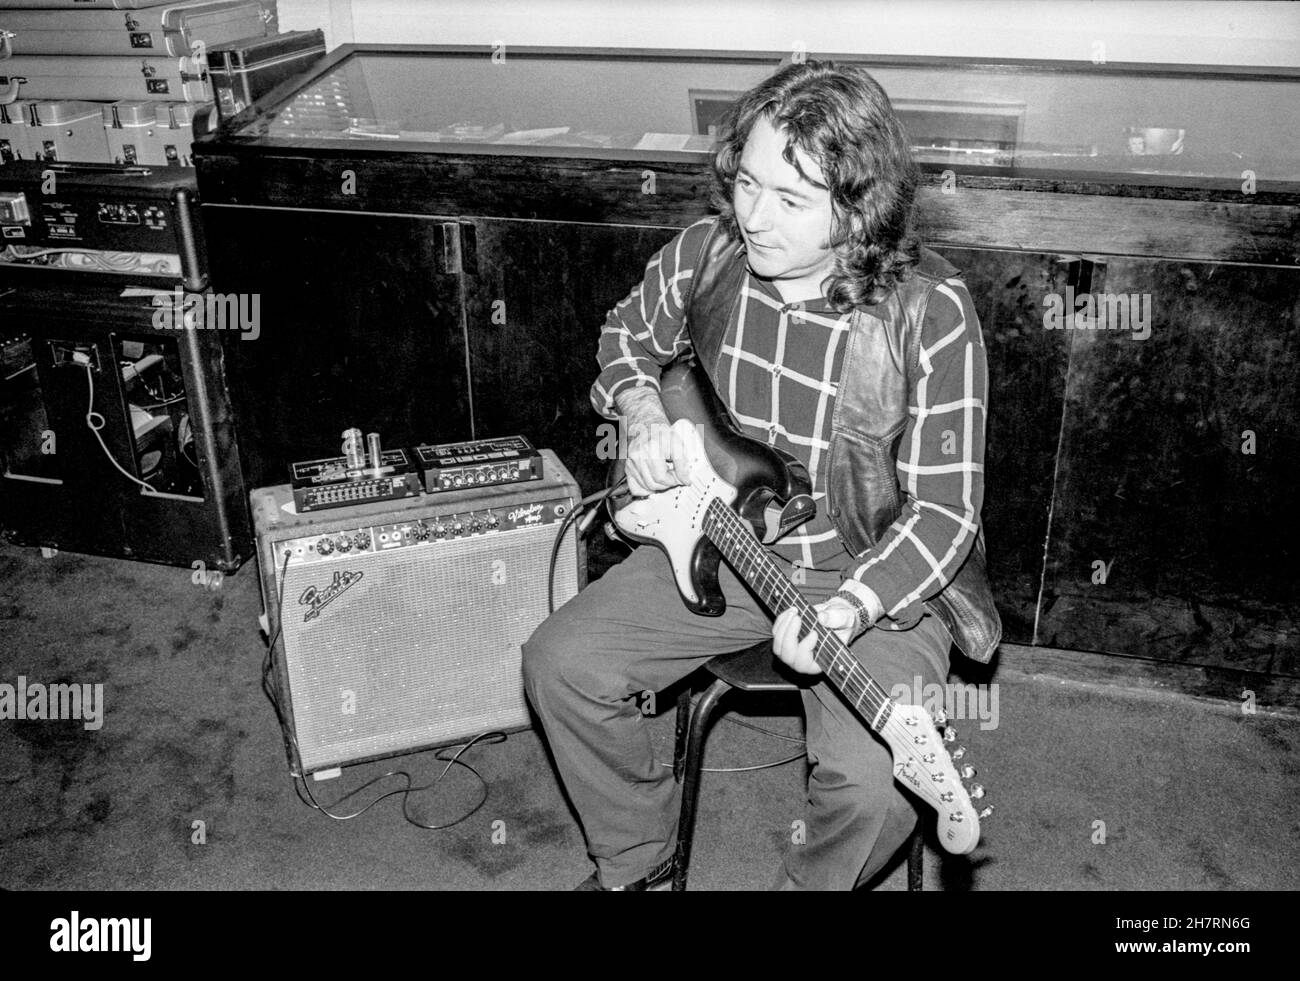 Irish blues/rock guitarist and singer Rory Gallagher trying out new equipment at Nomis Studios in West London, England on 11 July 1989. Stock Photo